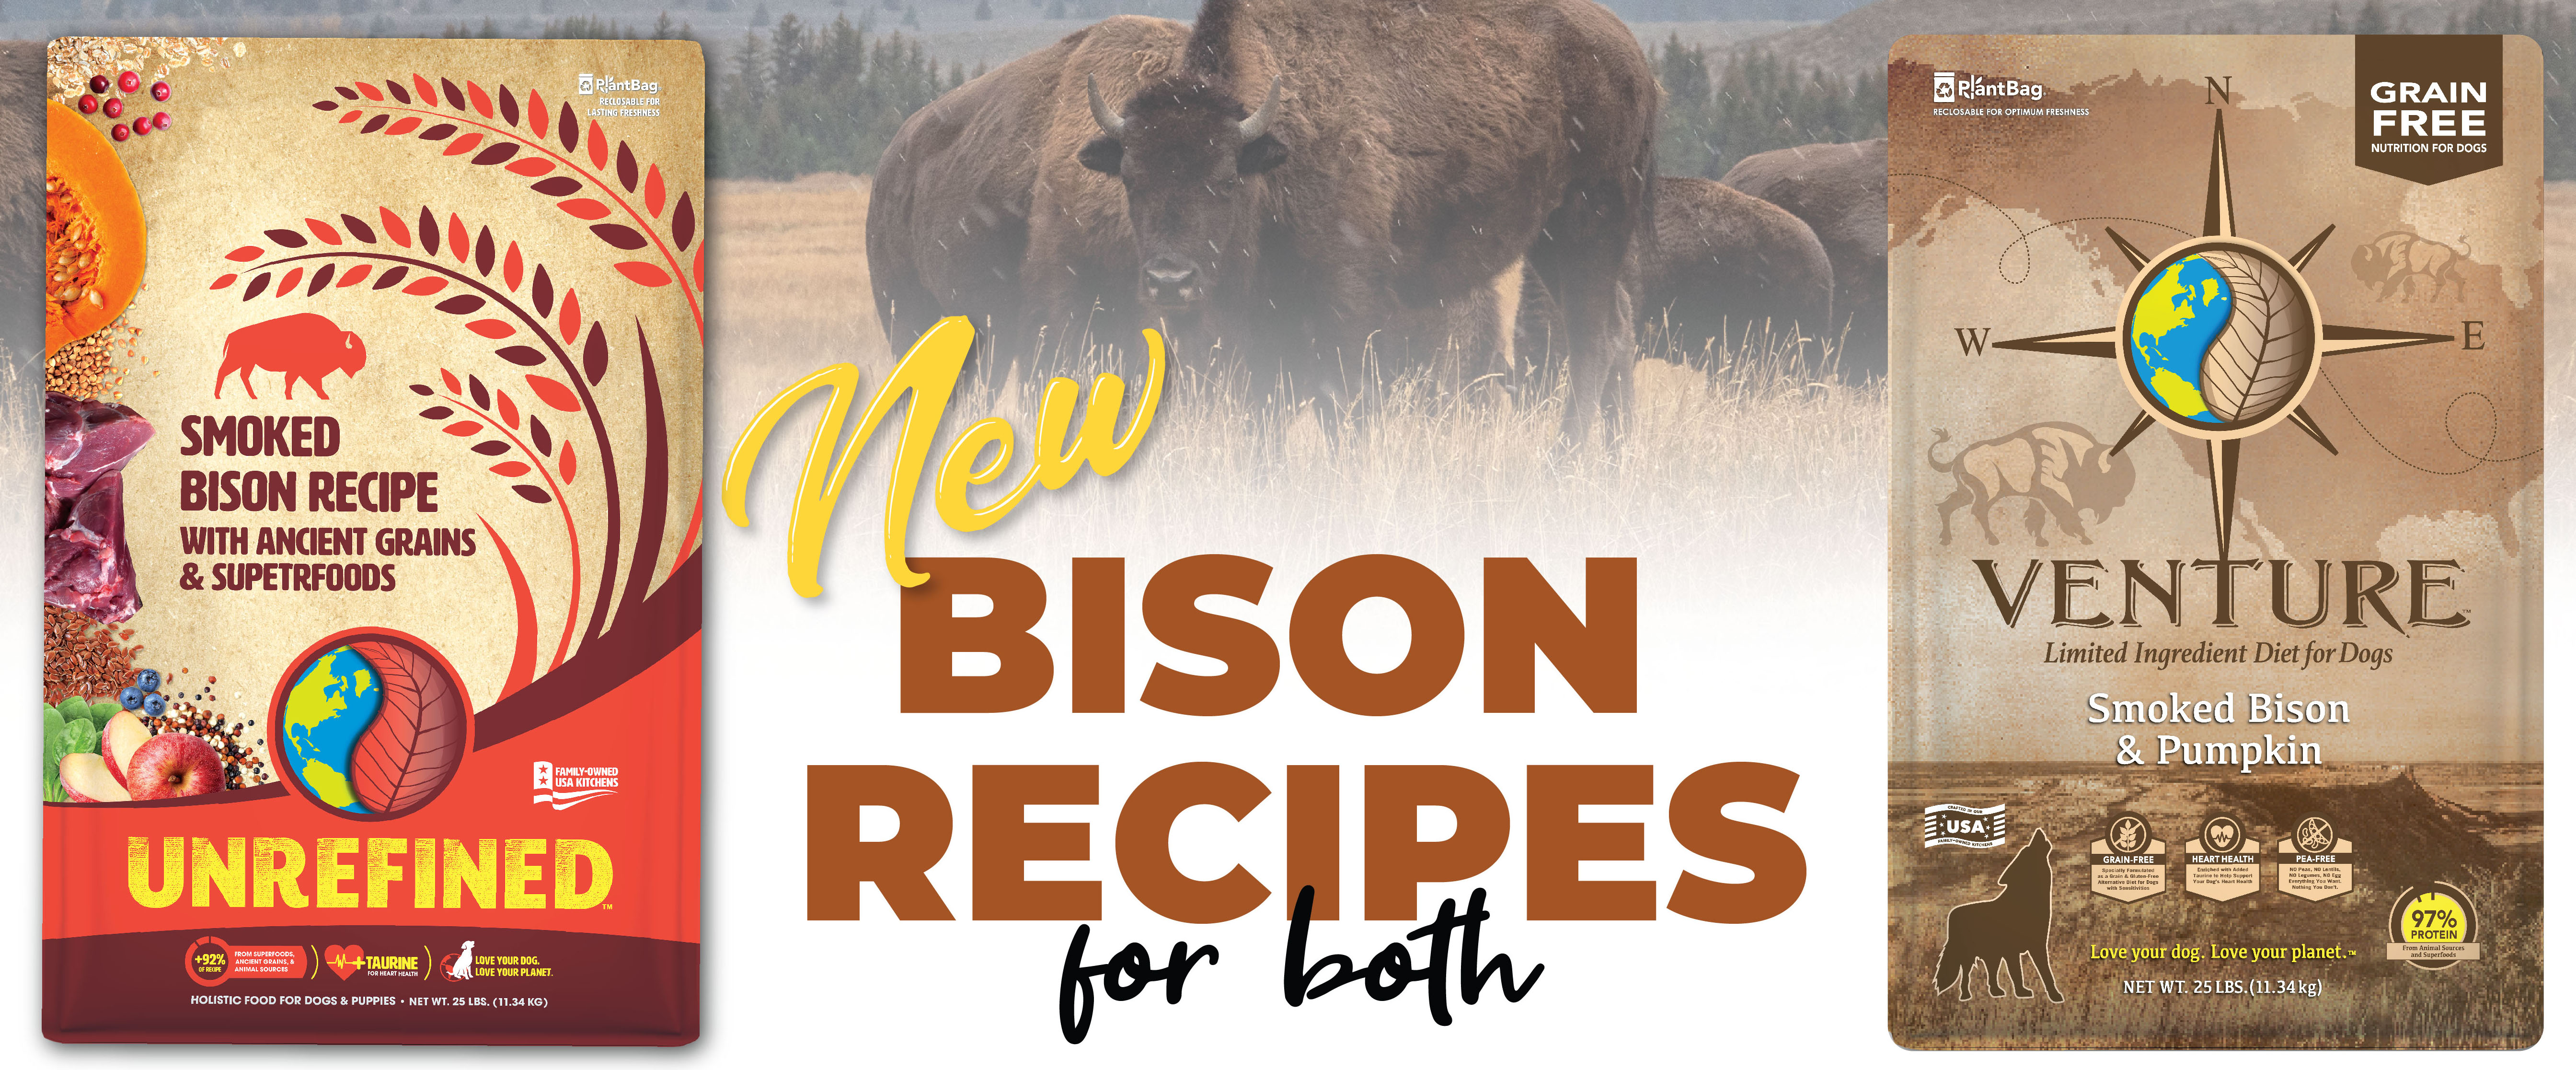 Earthborn Holistic's new Venture Smoked Bison & Pumpkin and Unrefined Smoked Bison Recipe